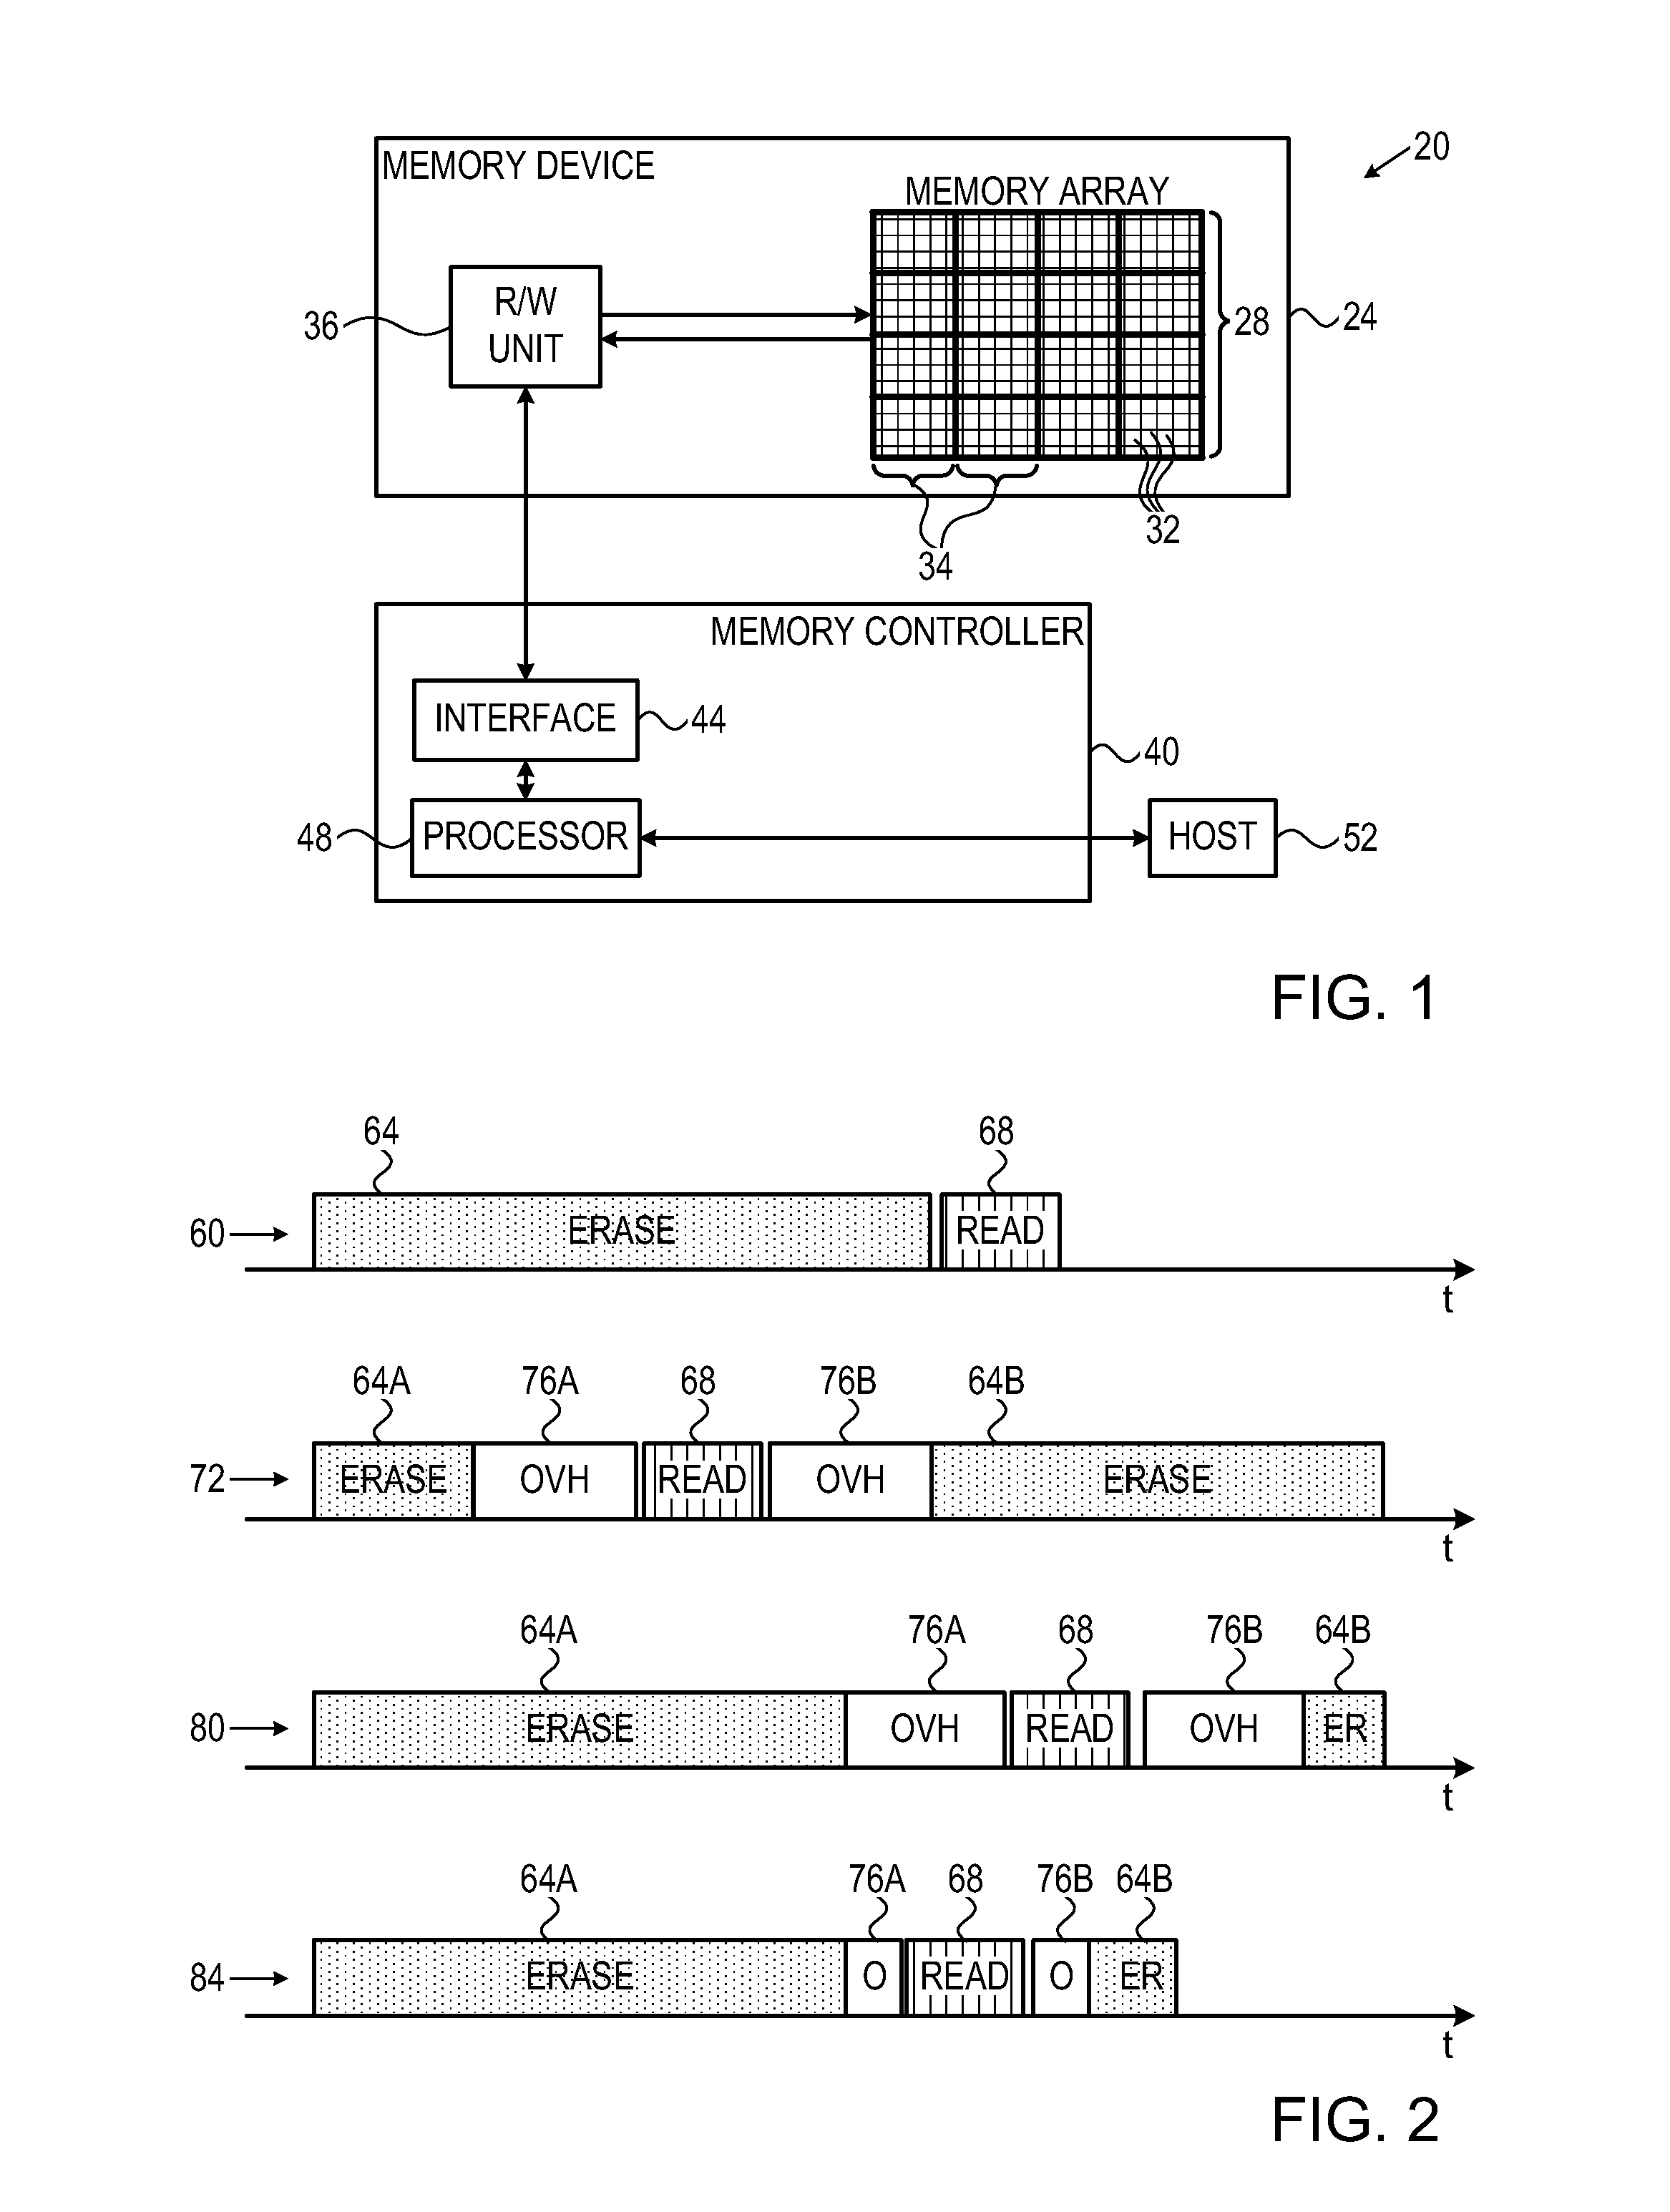 Efficient suspend-resume operation in memory devices